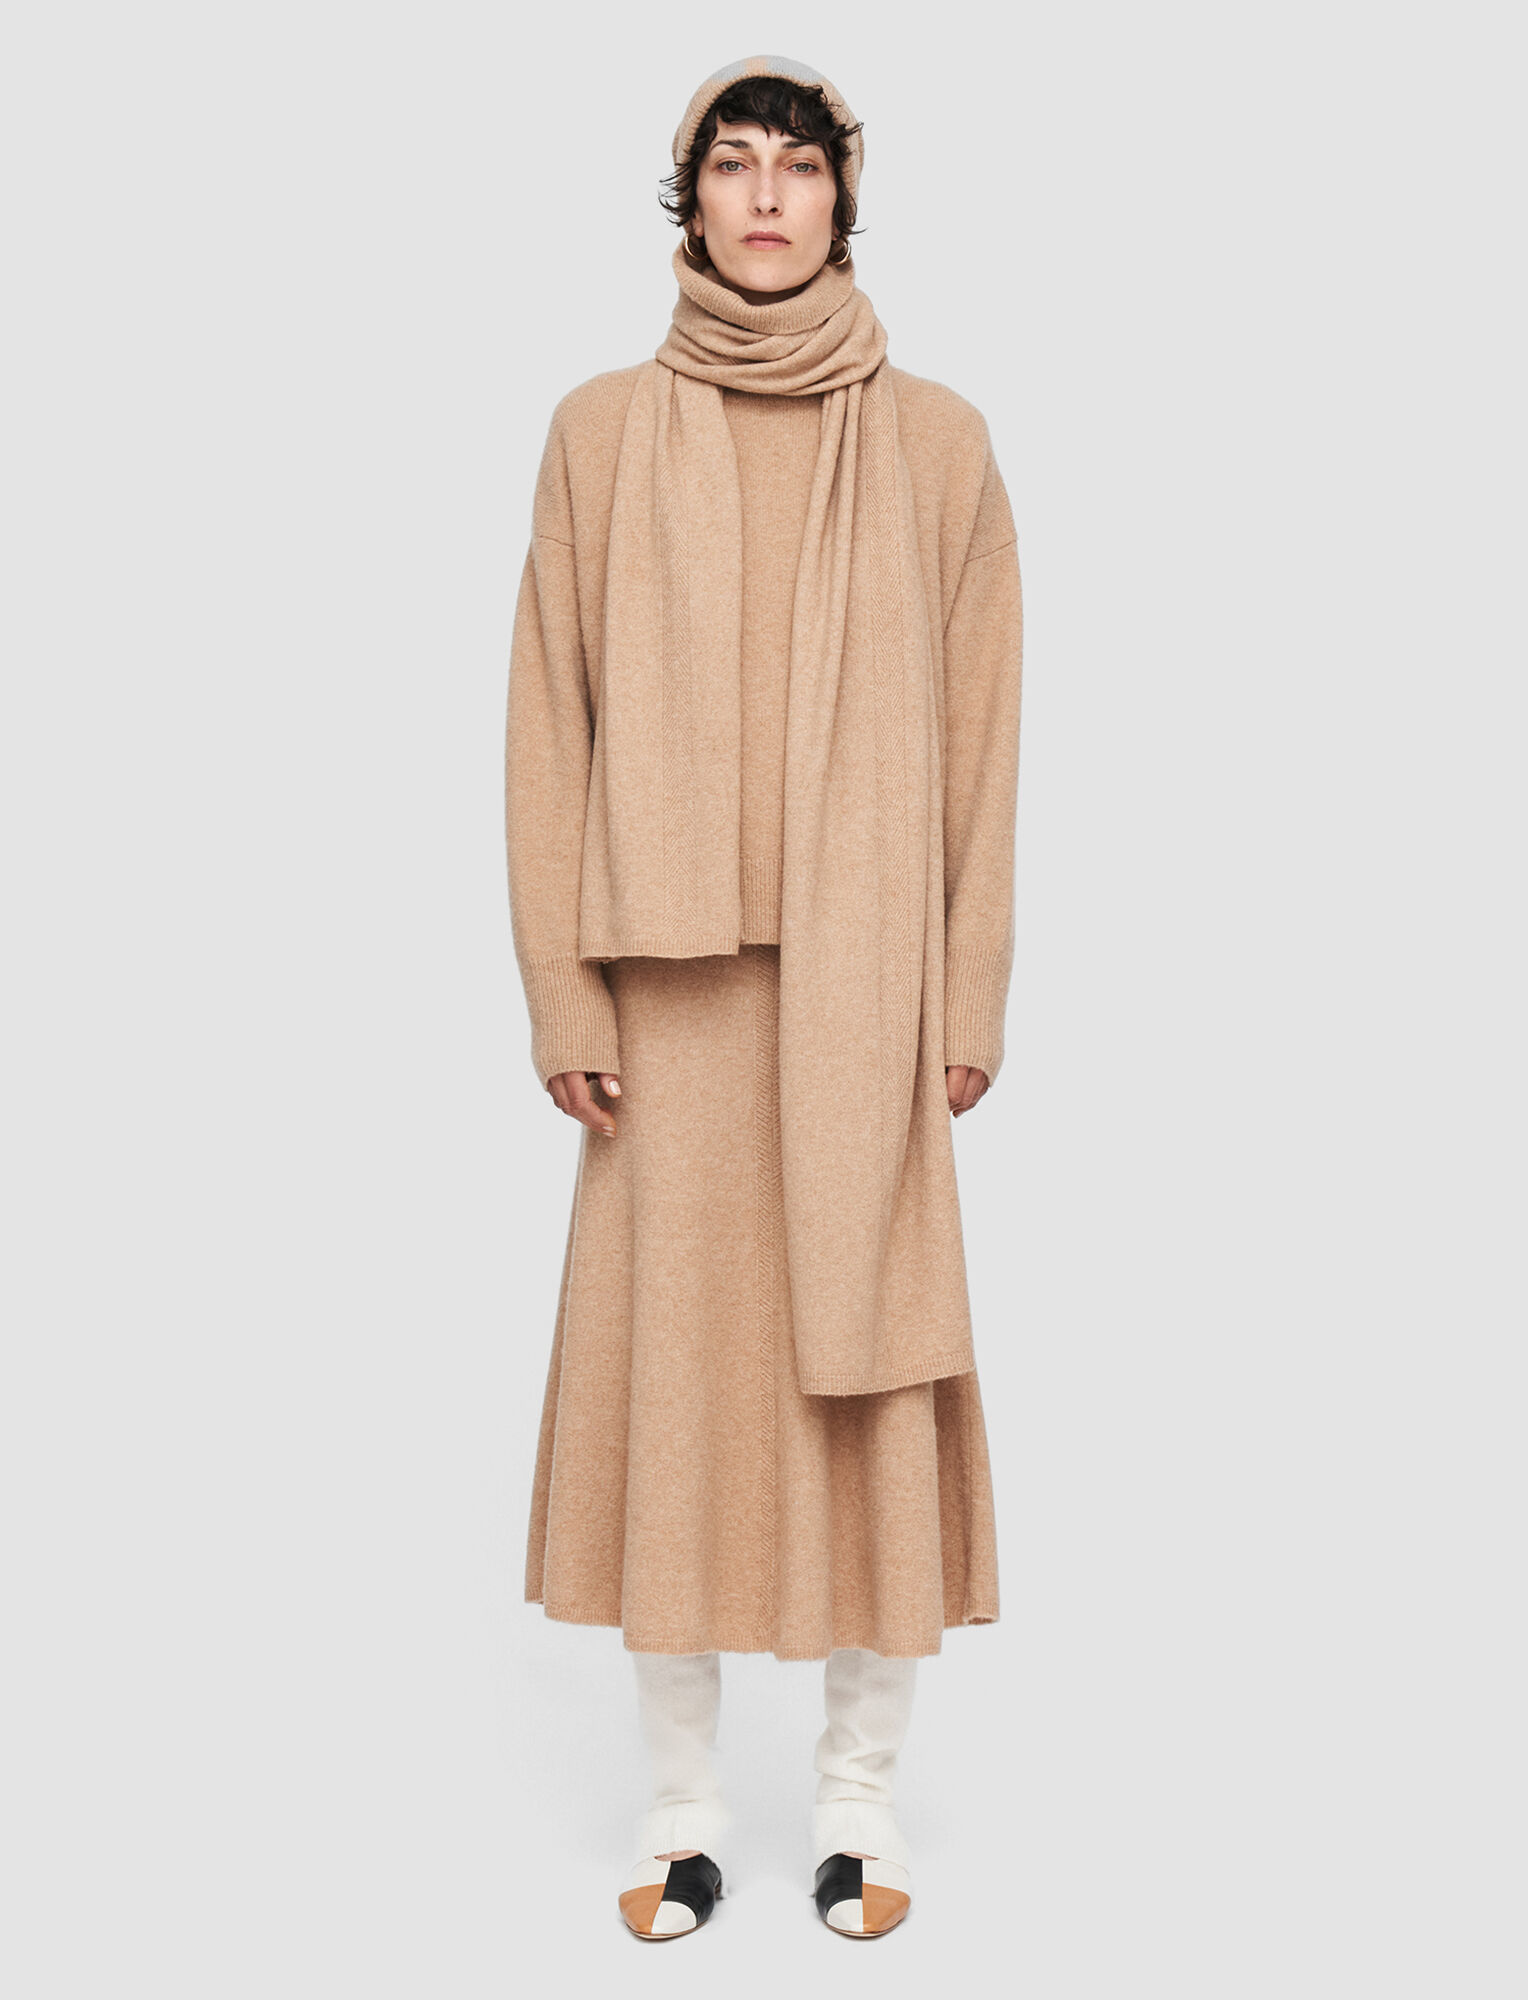 Joseph, Brushed Cashmere Scarf, in Light Camel